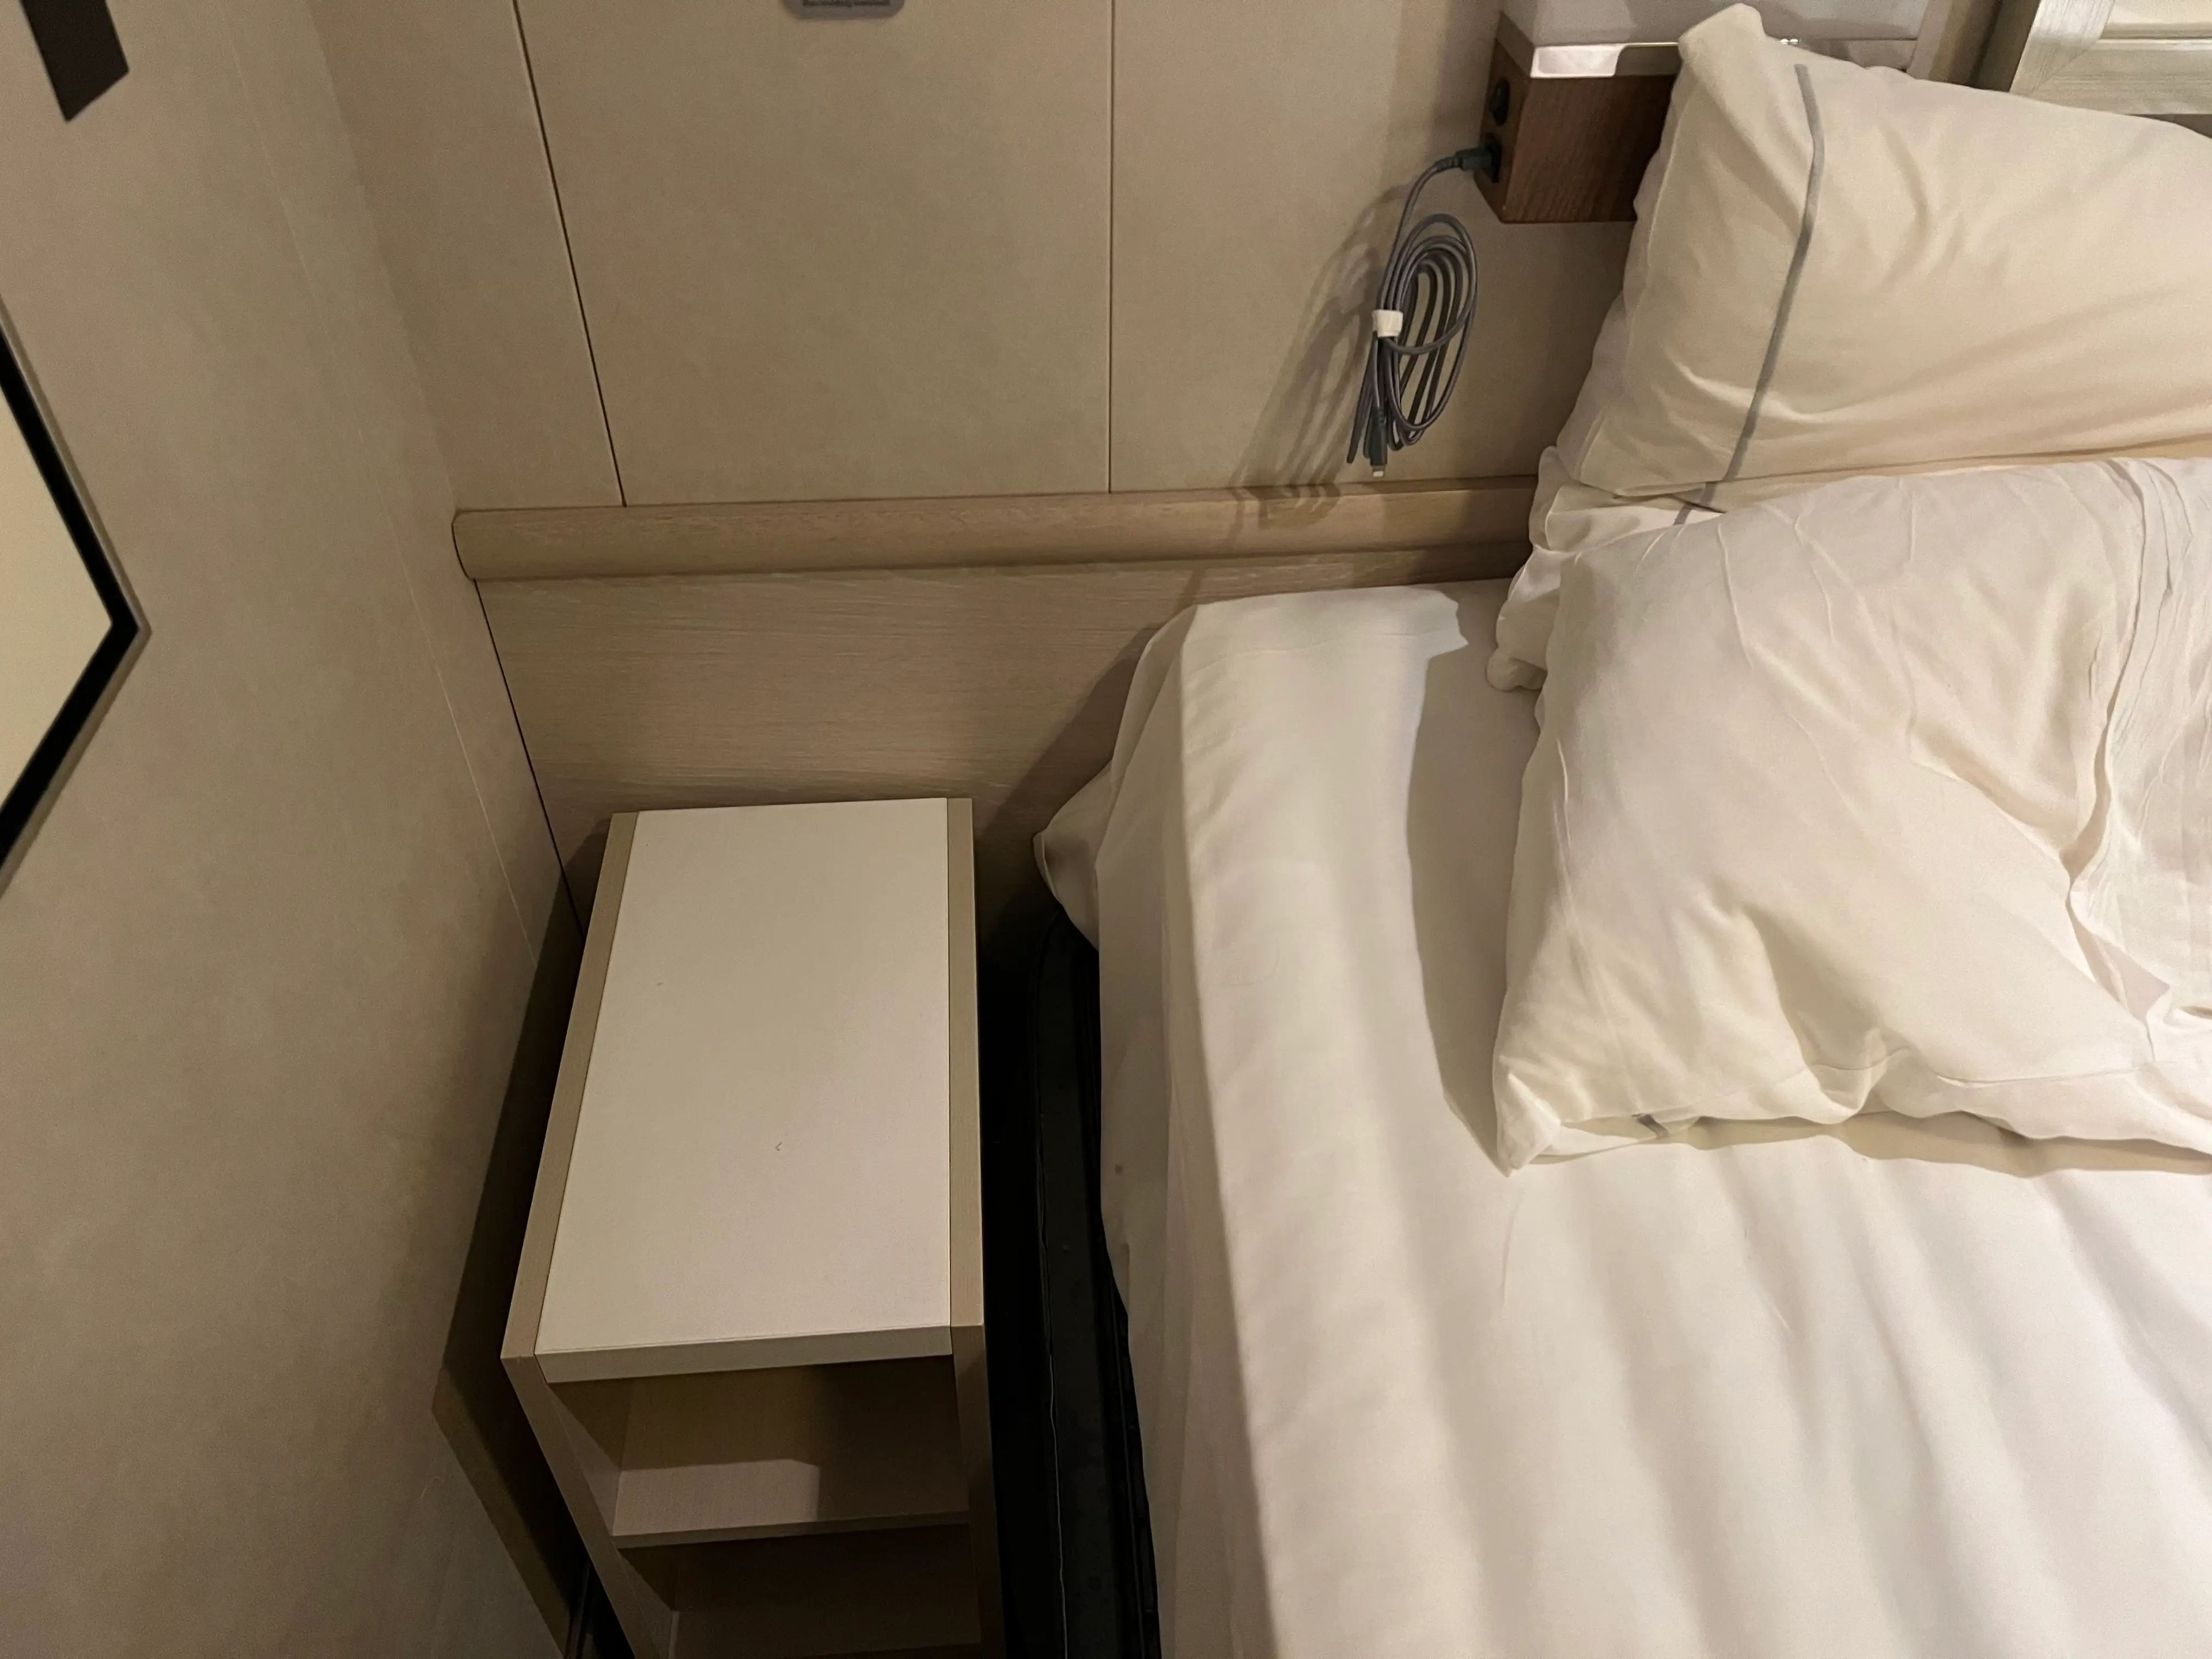 The side table and USB charger next to the bed.